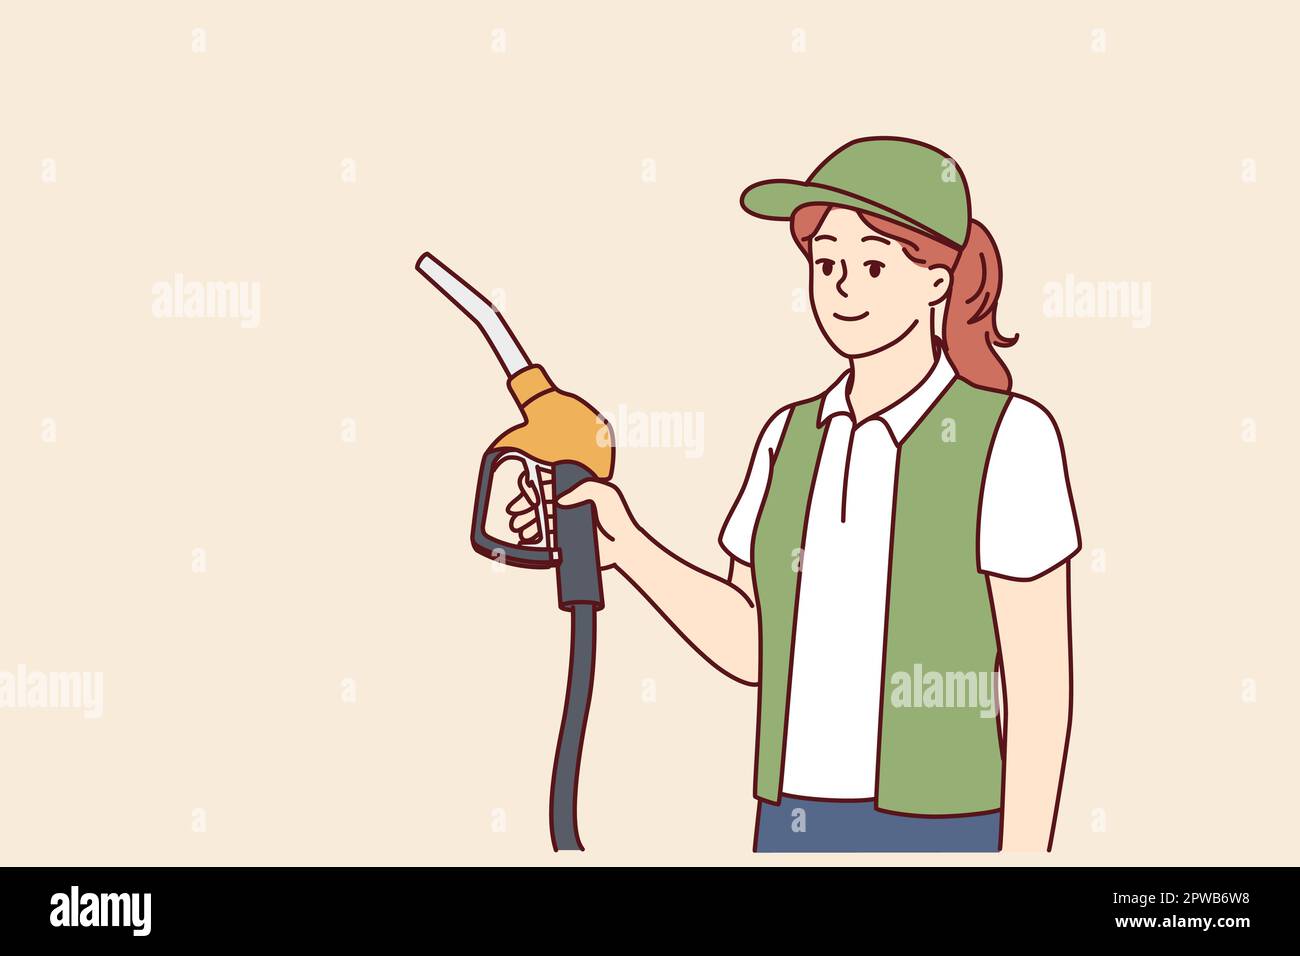 Woman serving customers at refueling station holding nozzles for refilling oil tank Stock Vector